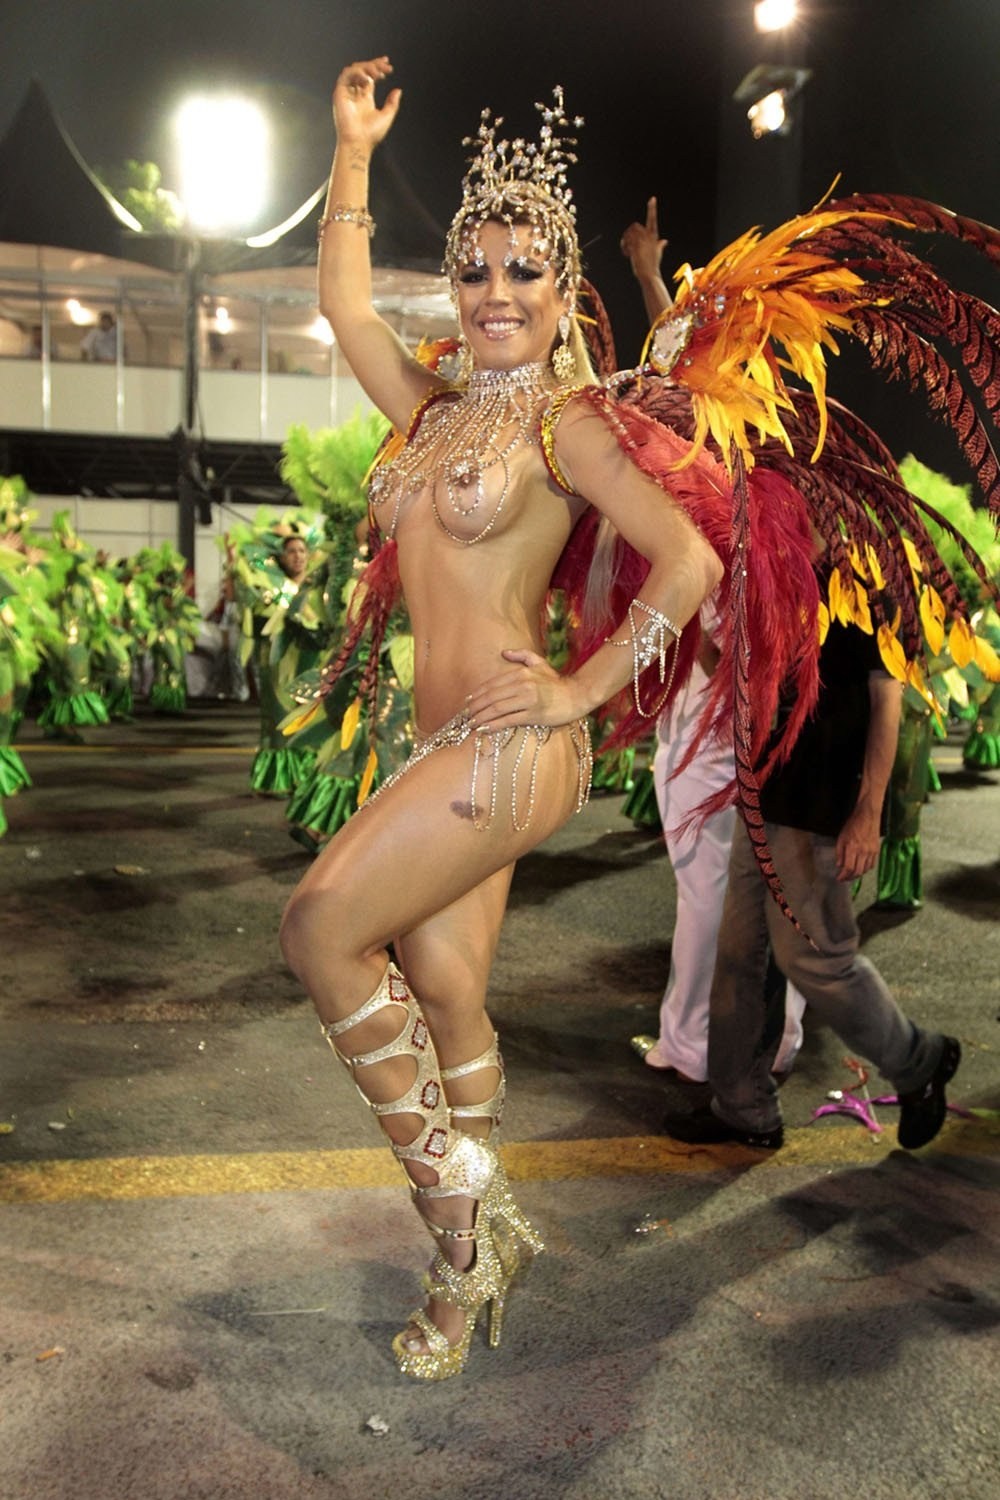 Sex with a Brazilian Woman at a Carnival (79 photos)